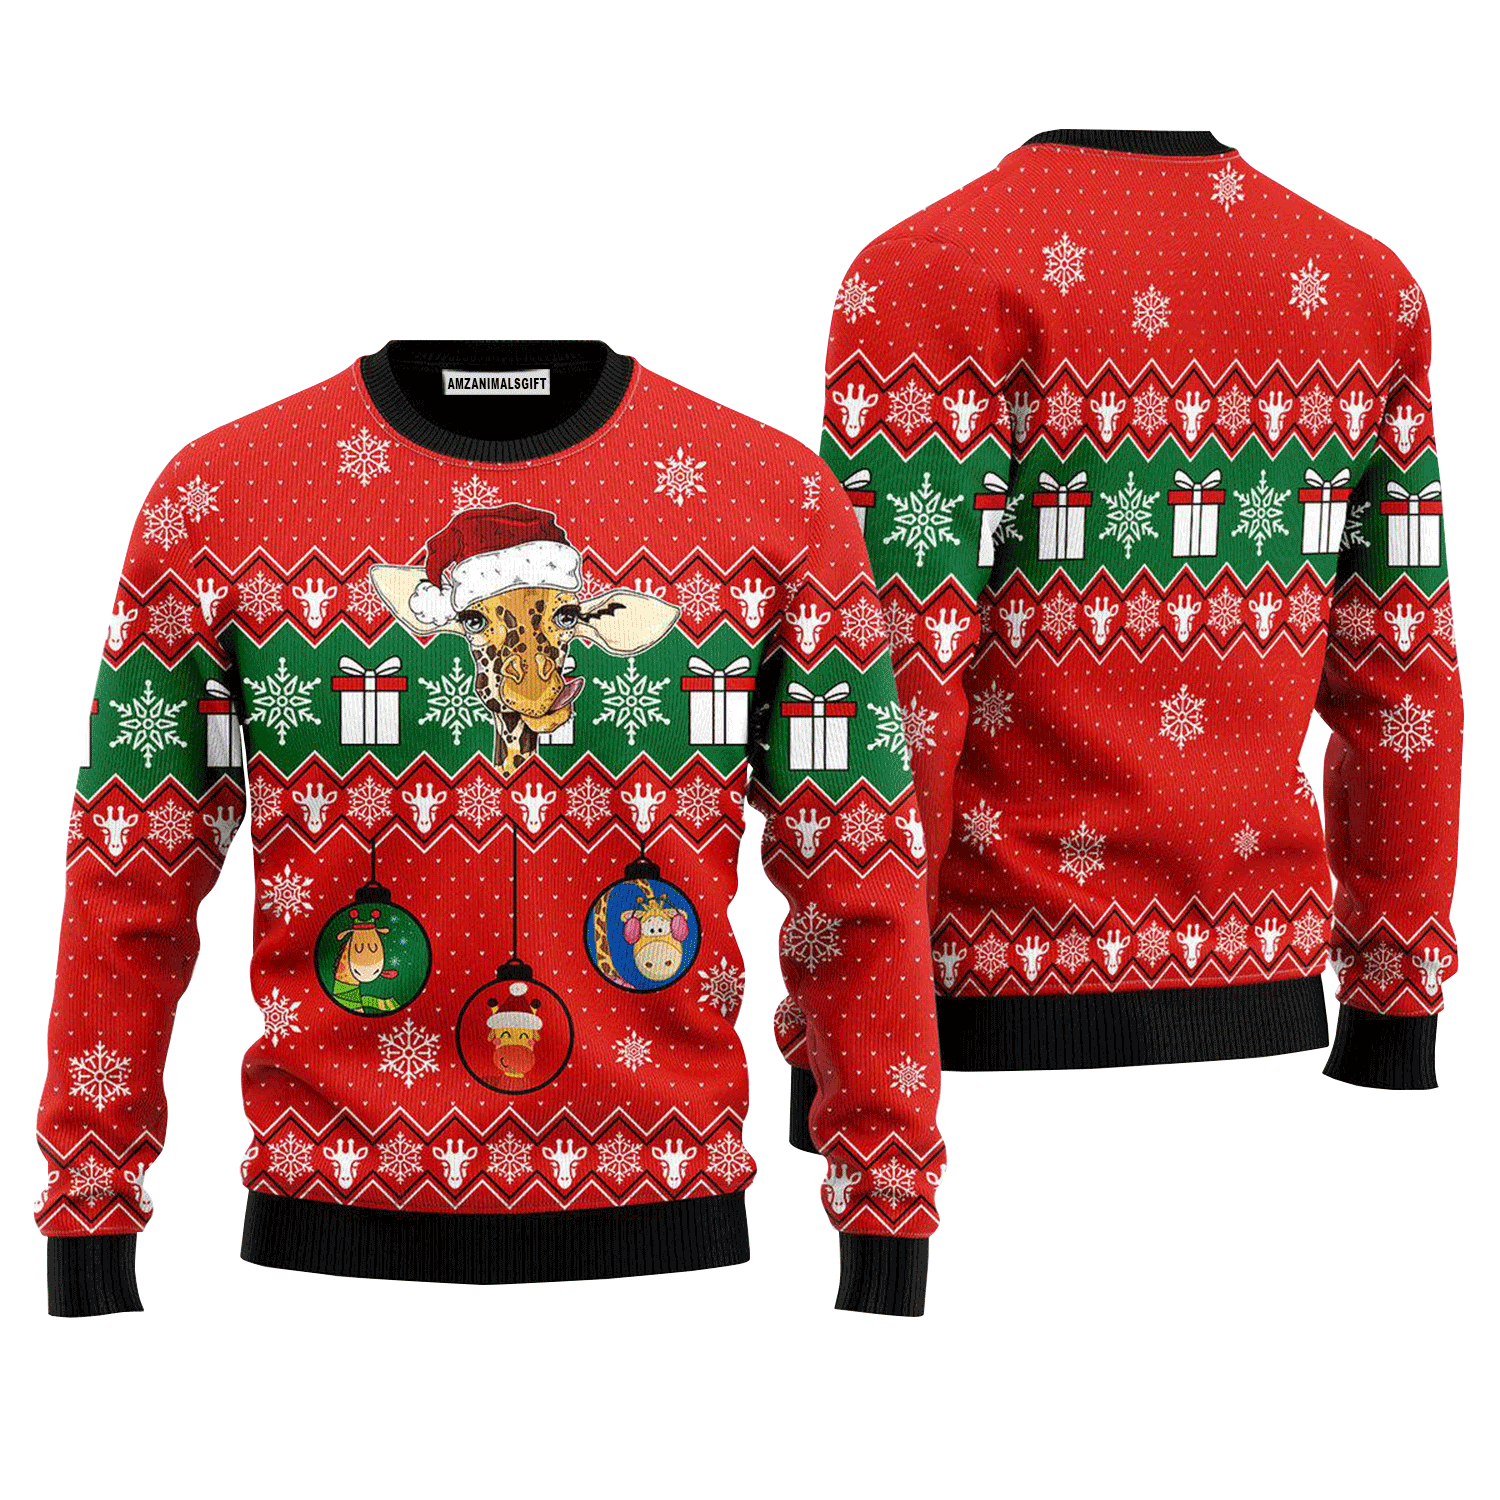 Lovely Giraffe Christmas Sweater, Ugly Sweater For Men & Women, Perfect Outfit For Christmas New Year Autumn Winter